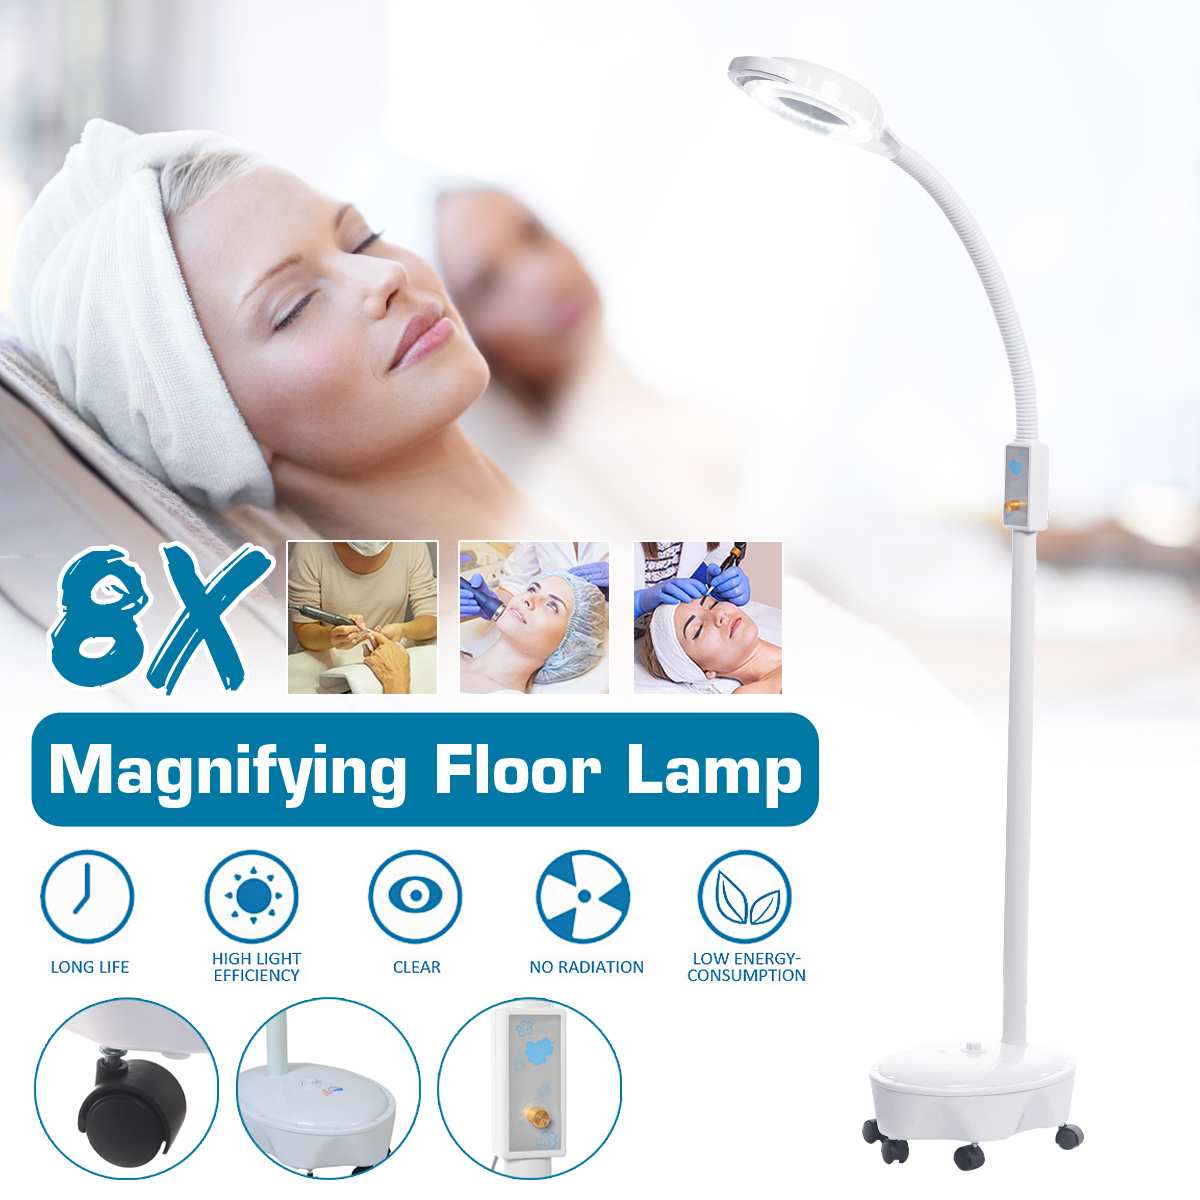 Pro 8X Diopter 120 LED Magnifying Floor Stand Lamp Magnifier Glass Cold Ligth Len Beauty Facial Light For Salon Nail Tattoo 220V